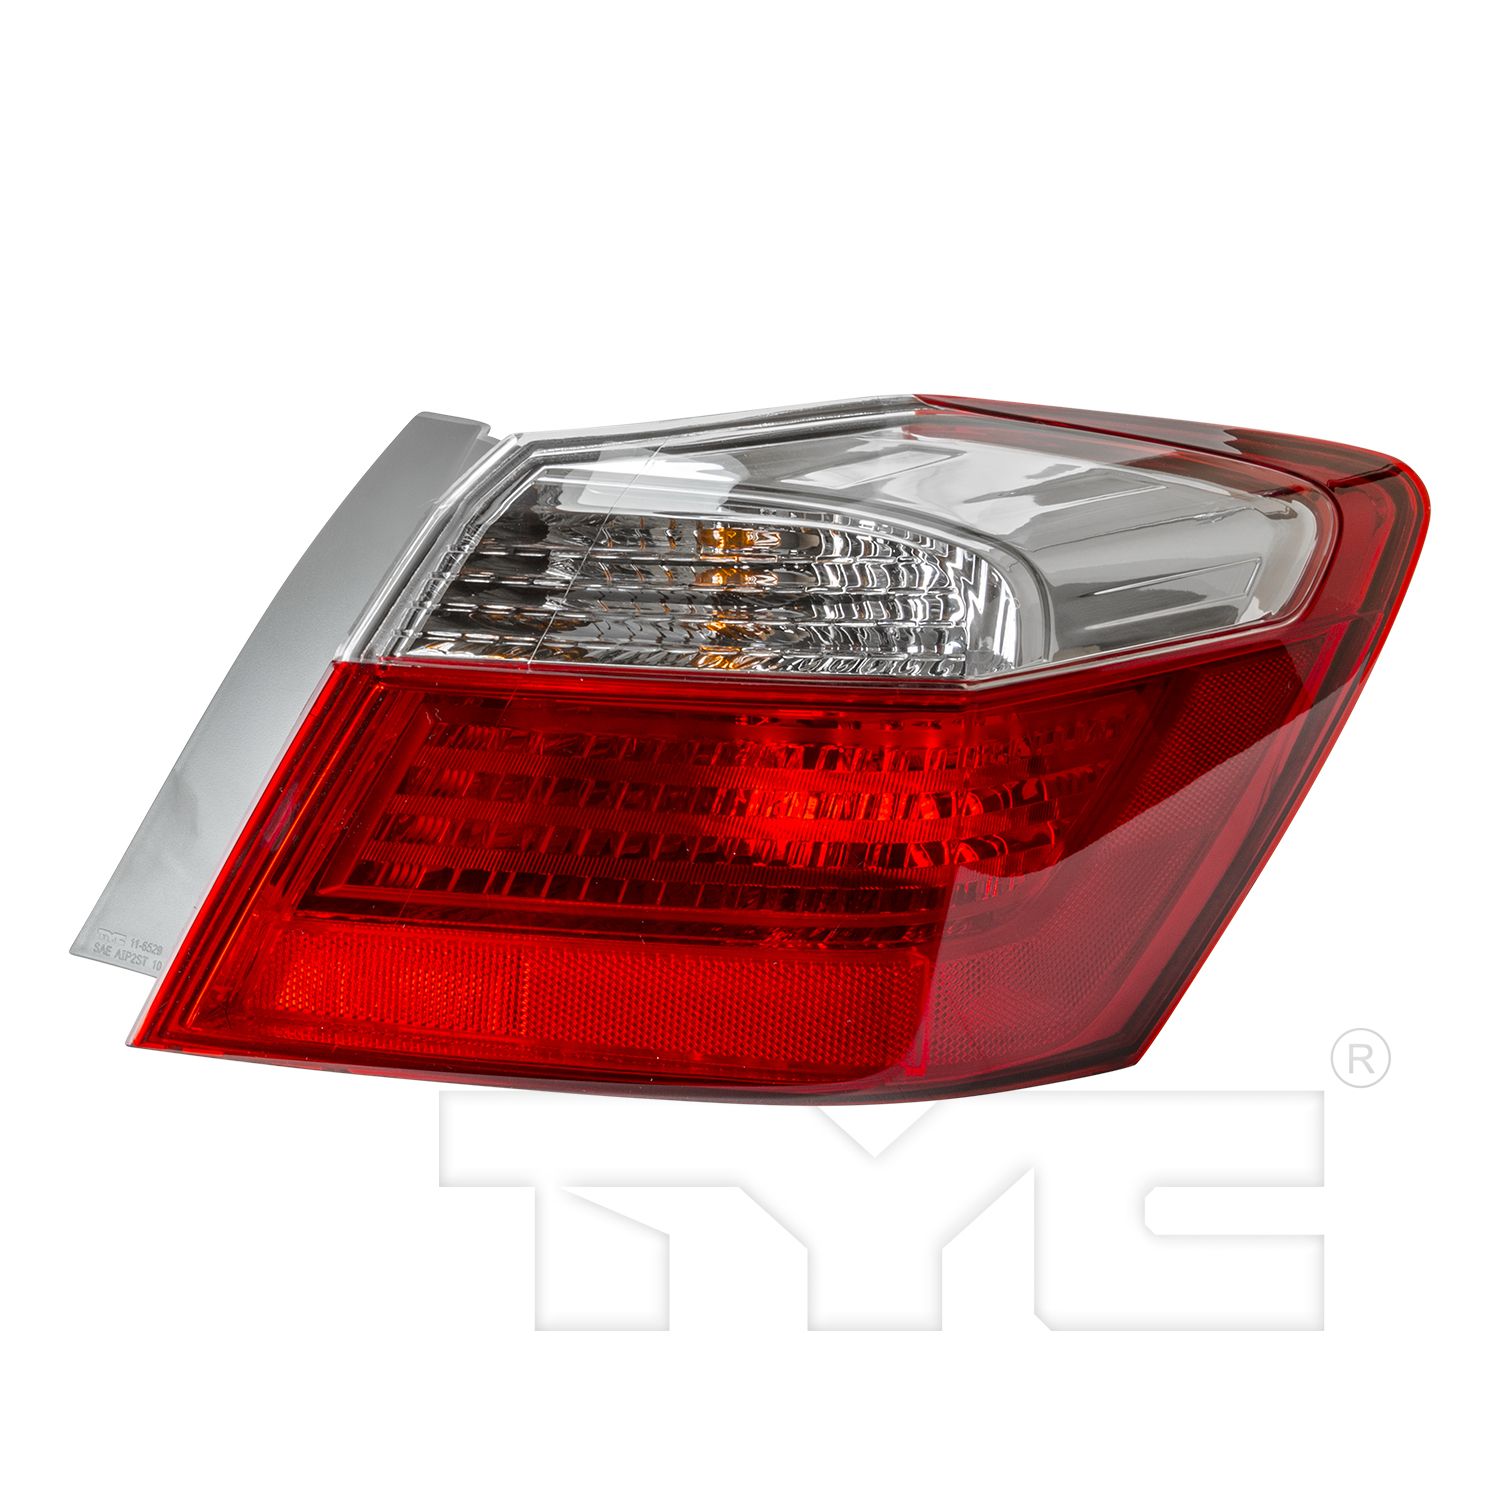 Aftermarket TAILLIGHTS for HONDA - ACCORD, ACCORD,13-15,RT Taillamp assy outer